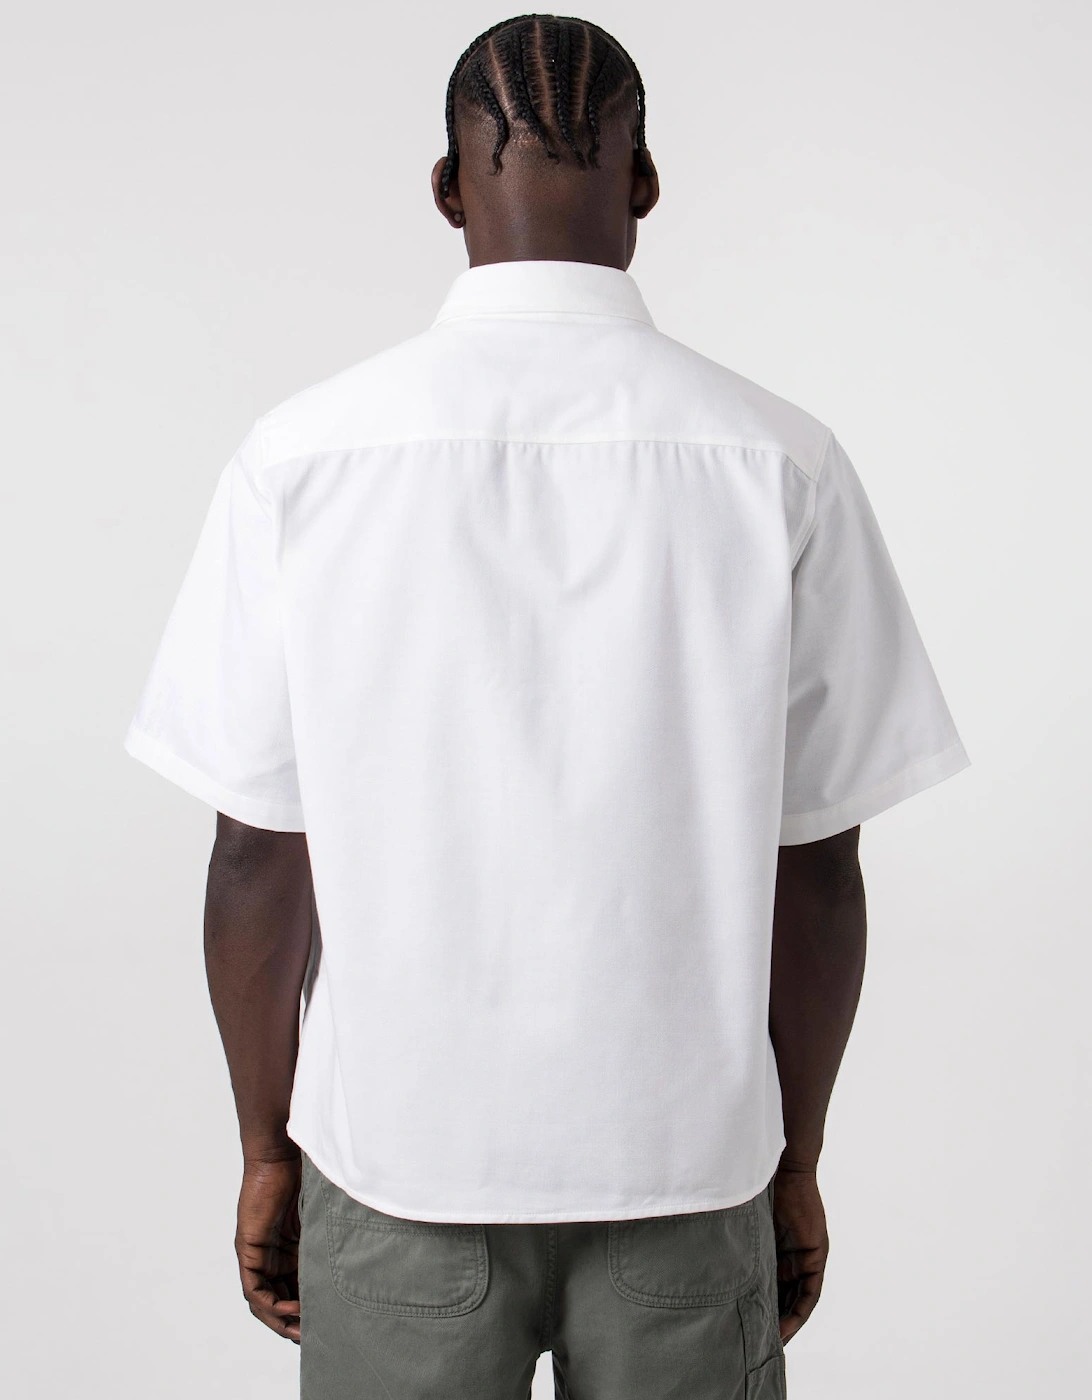 Relaxed Fit Short Sleeve Ekyno Shirt